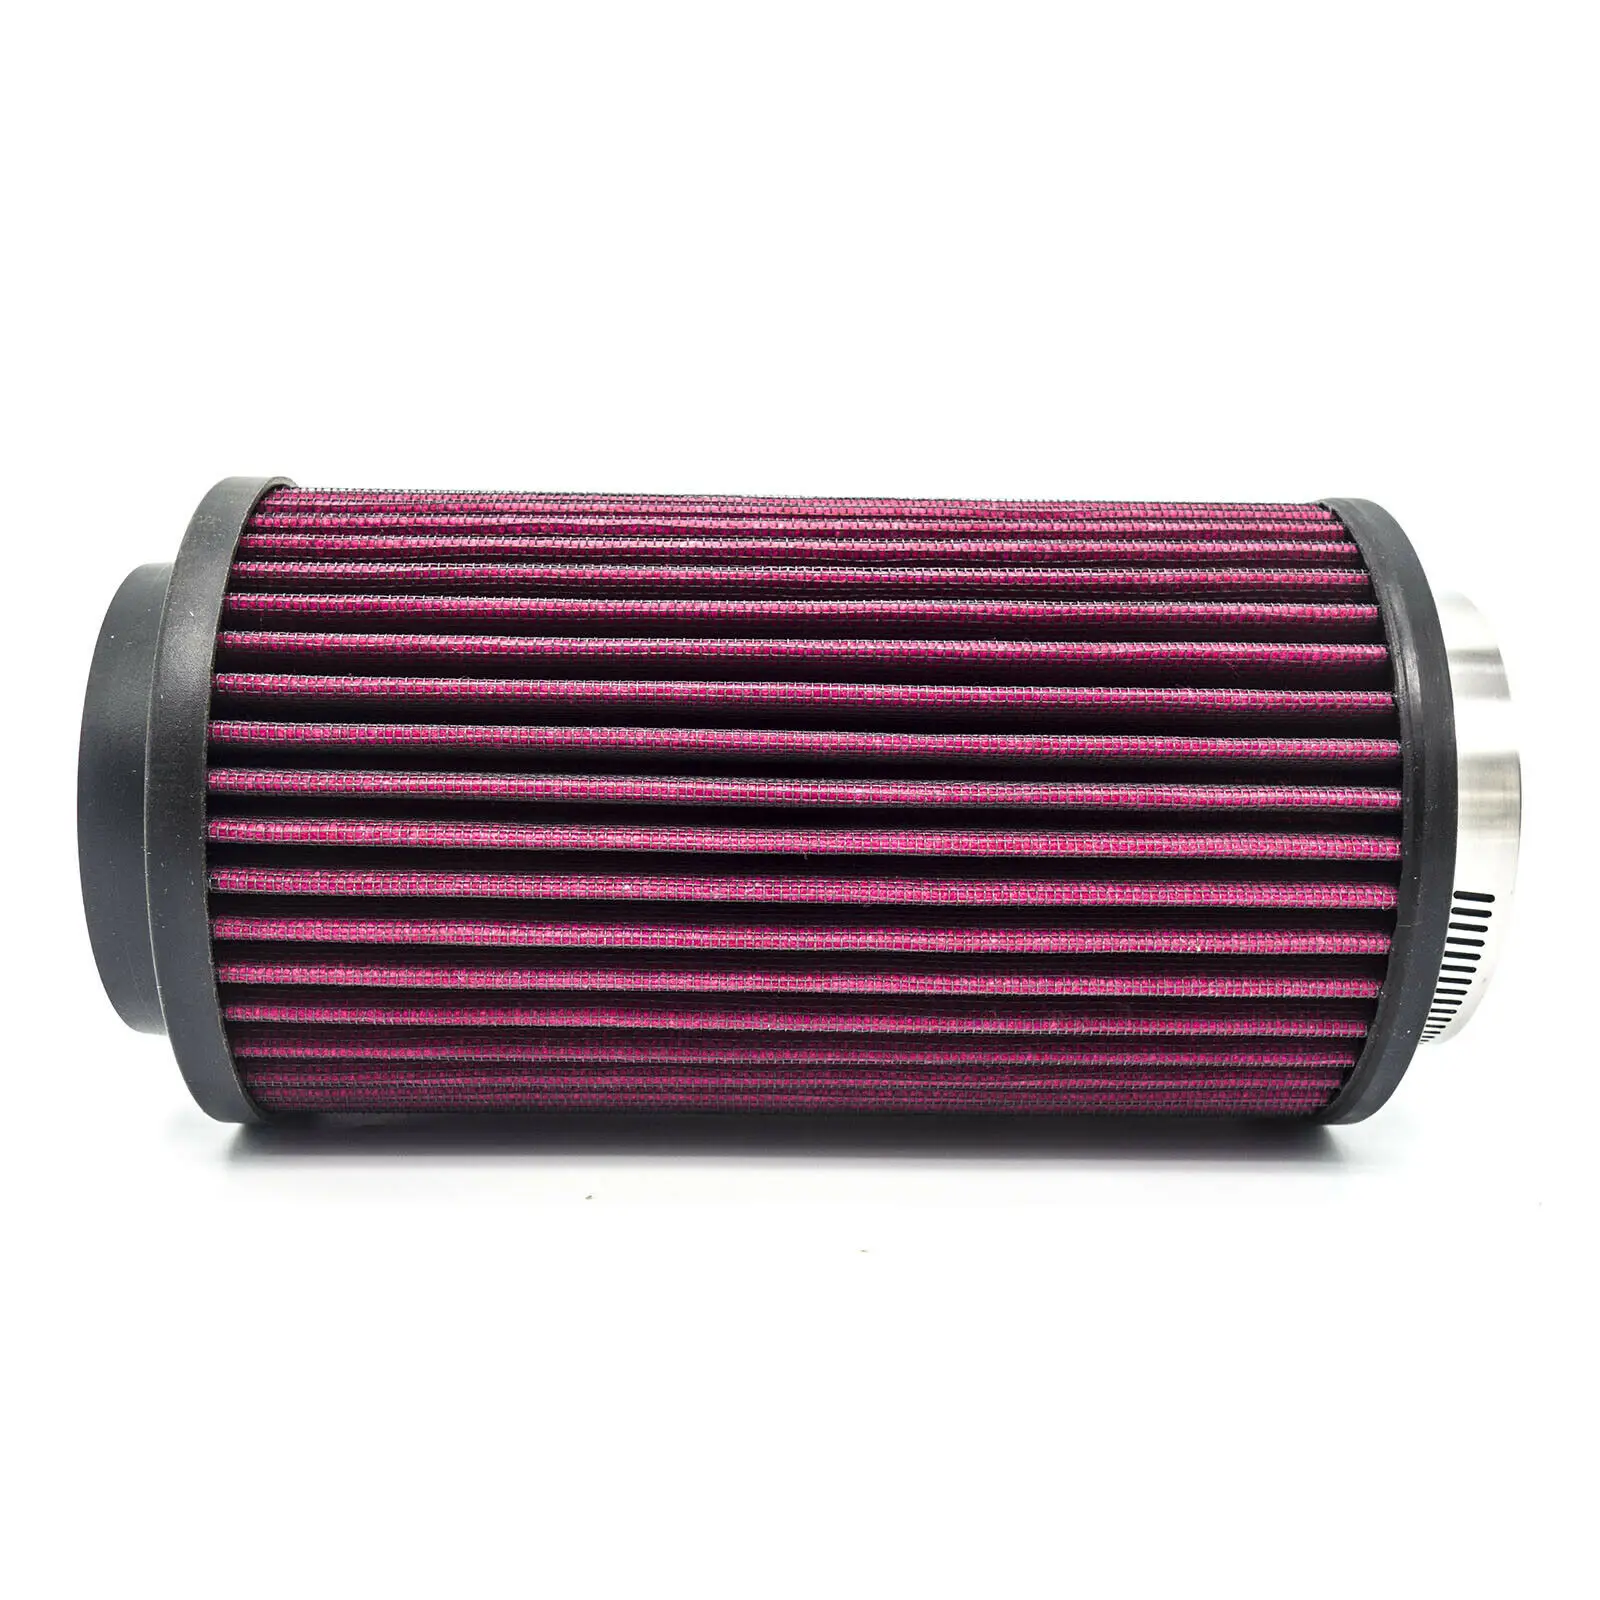 1253144,5811633,Compatible with Polaris Sportsman 500 335 450 550 570 700 800 850 1000. MinStar Air Filter Replace #7080595,7082101 